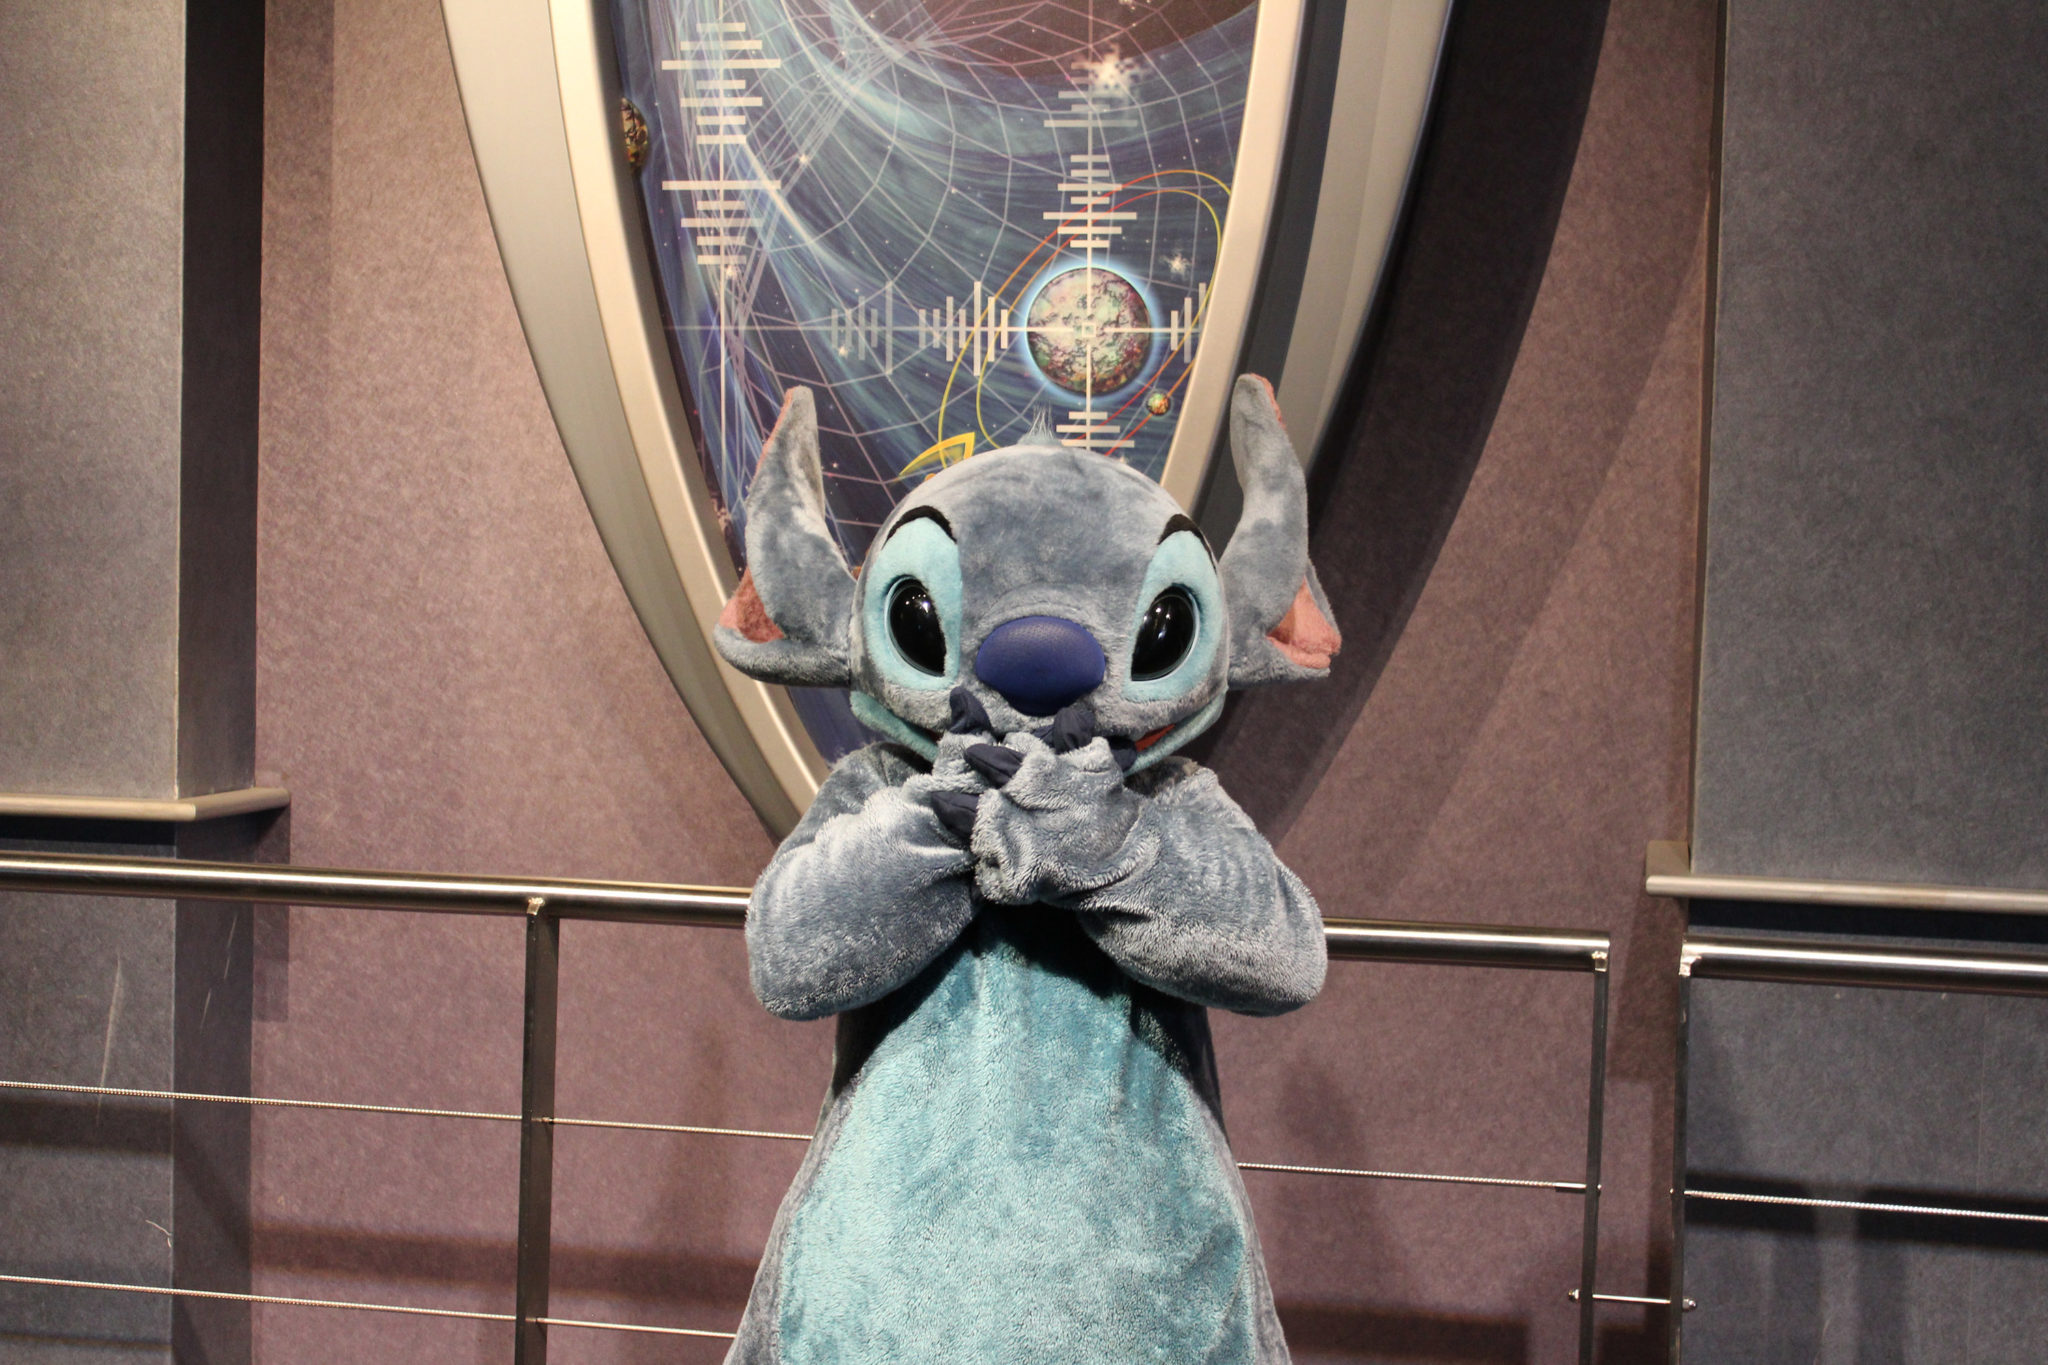 Stitch covering his mouth with his hands.